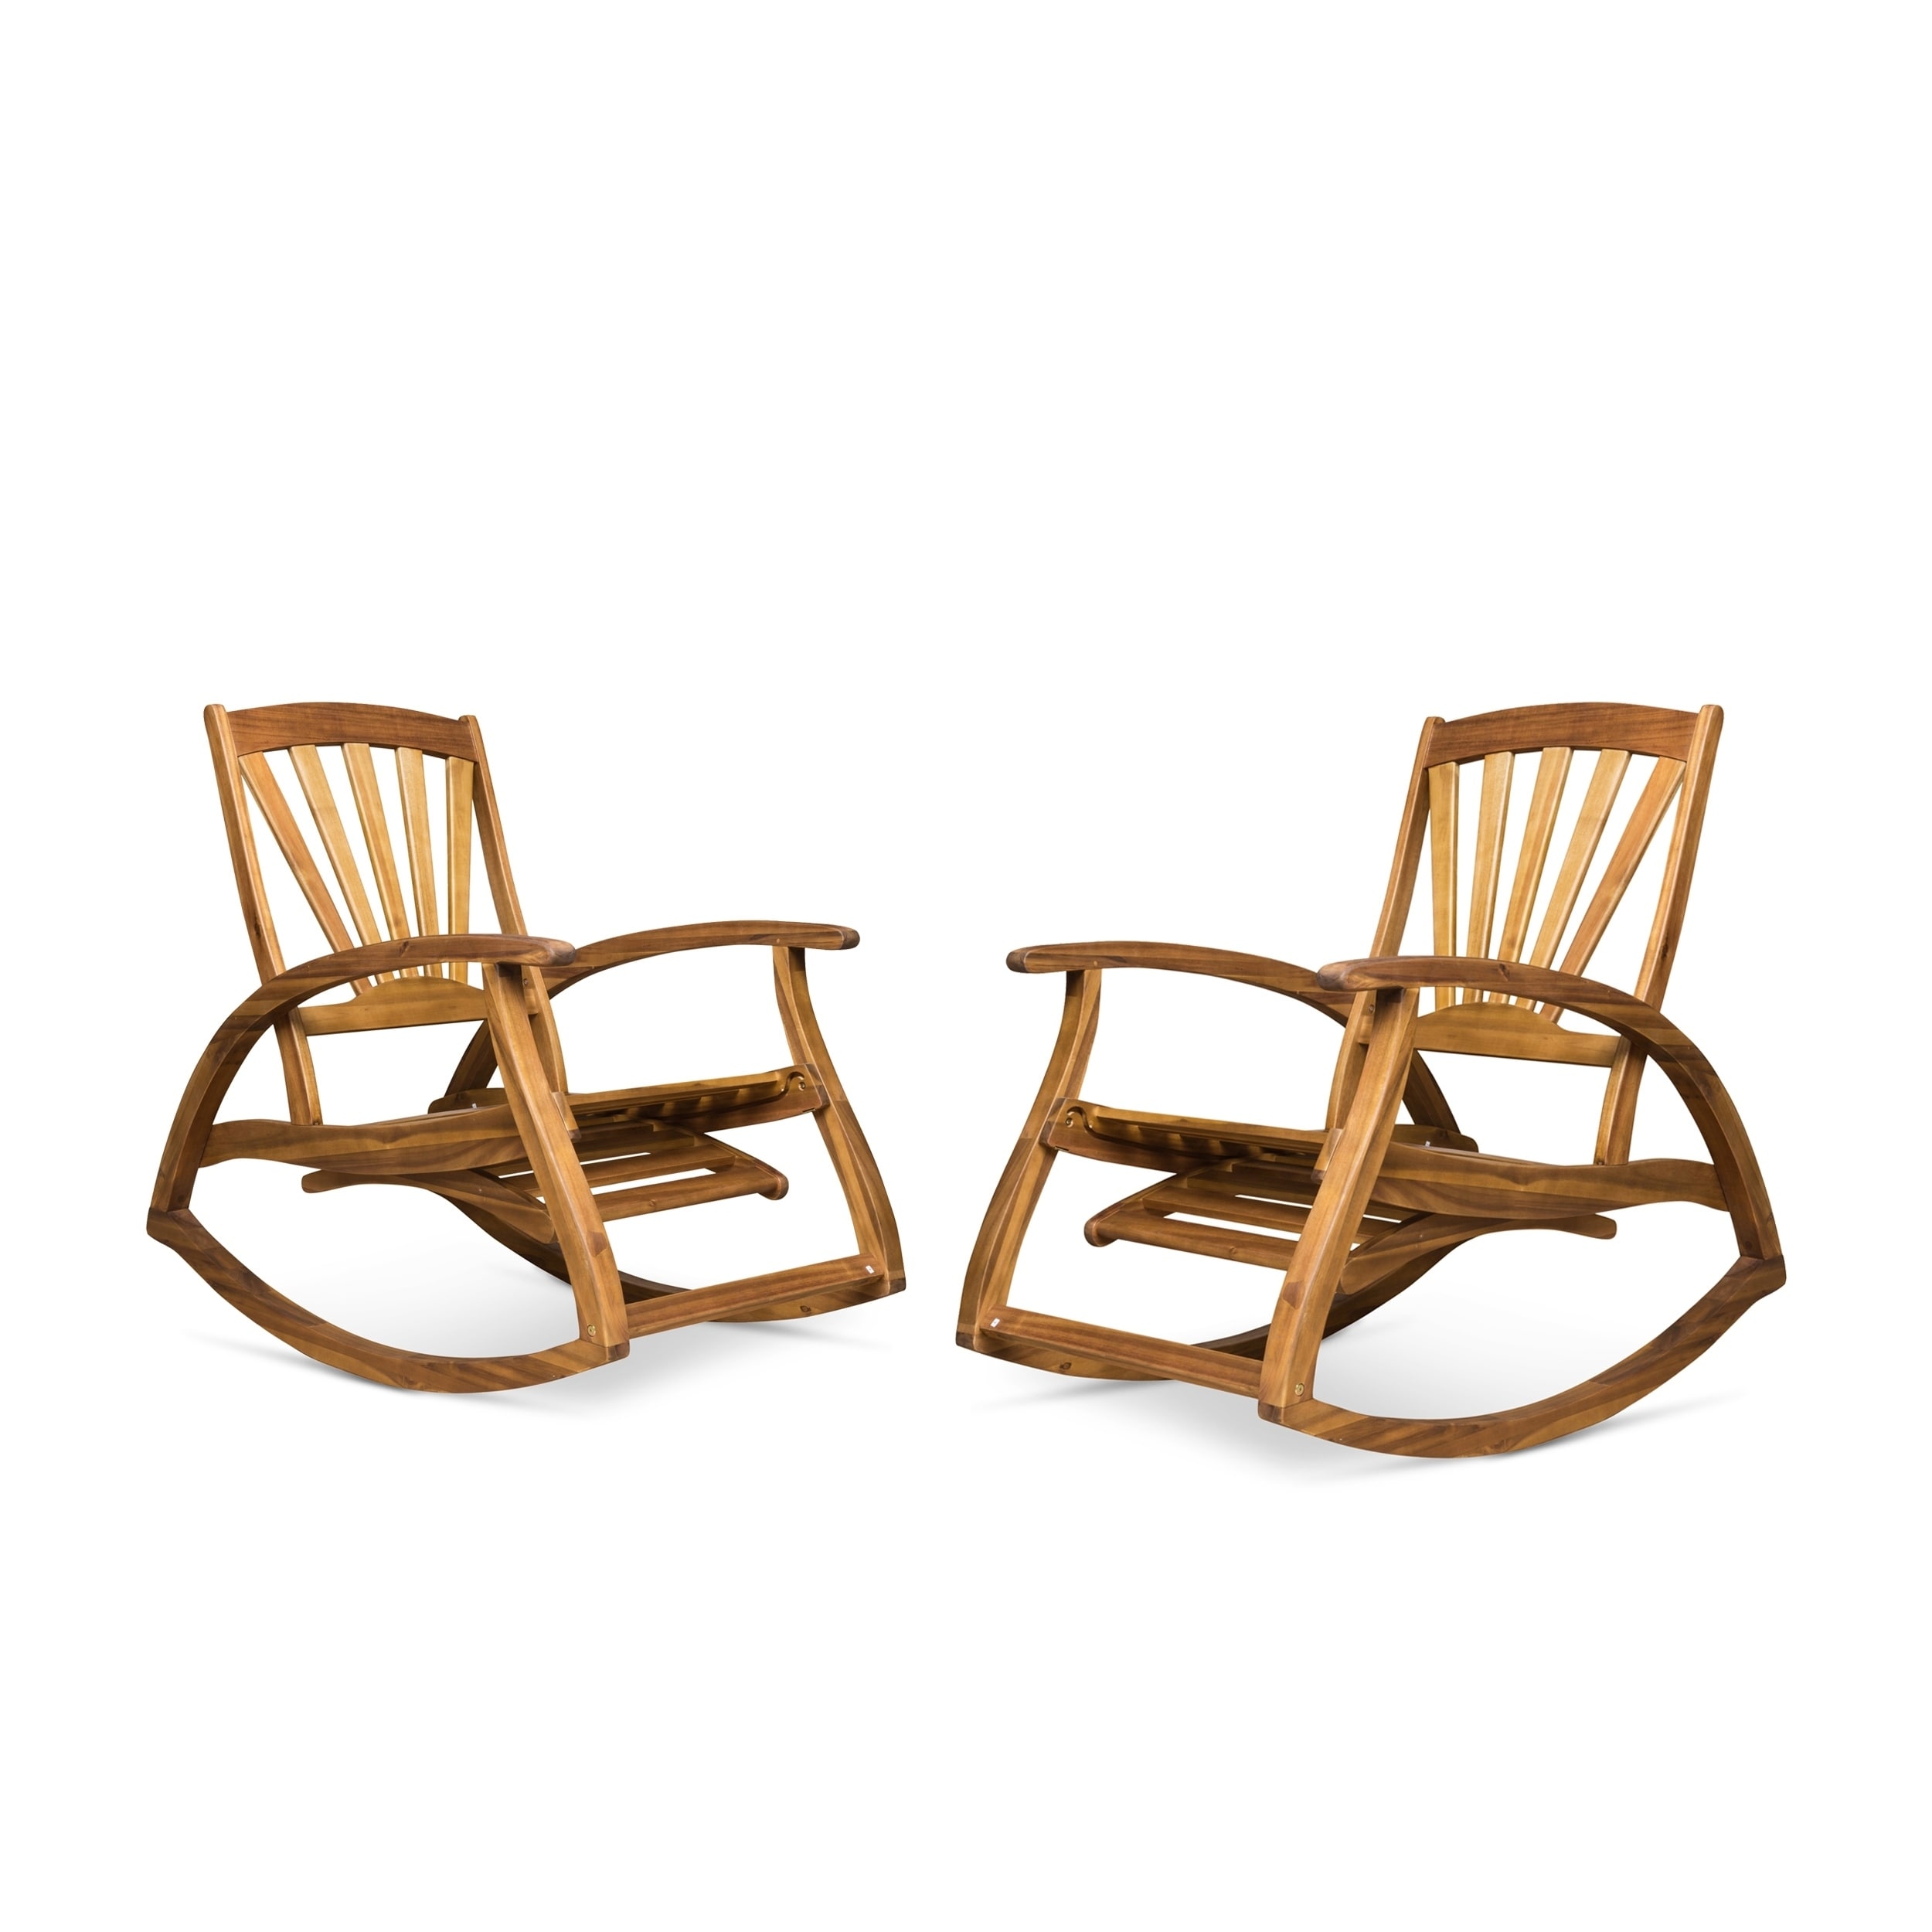 Sunview Outdoor Rustic Acacia Wood Recliner Rocking Chairs